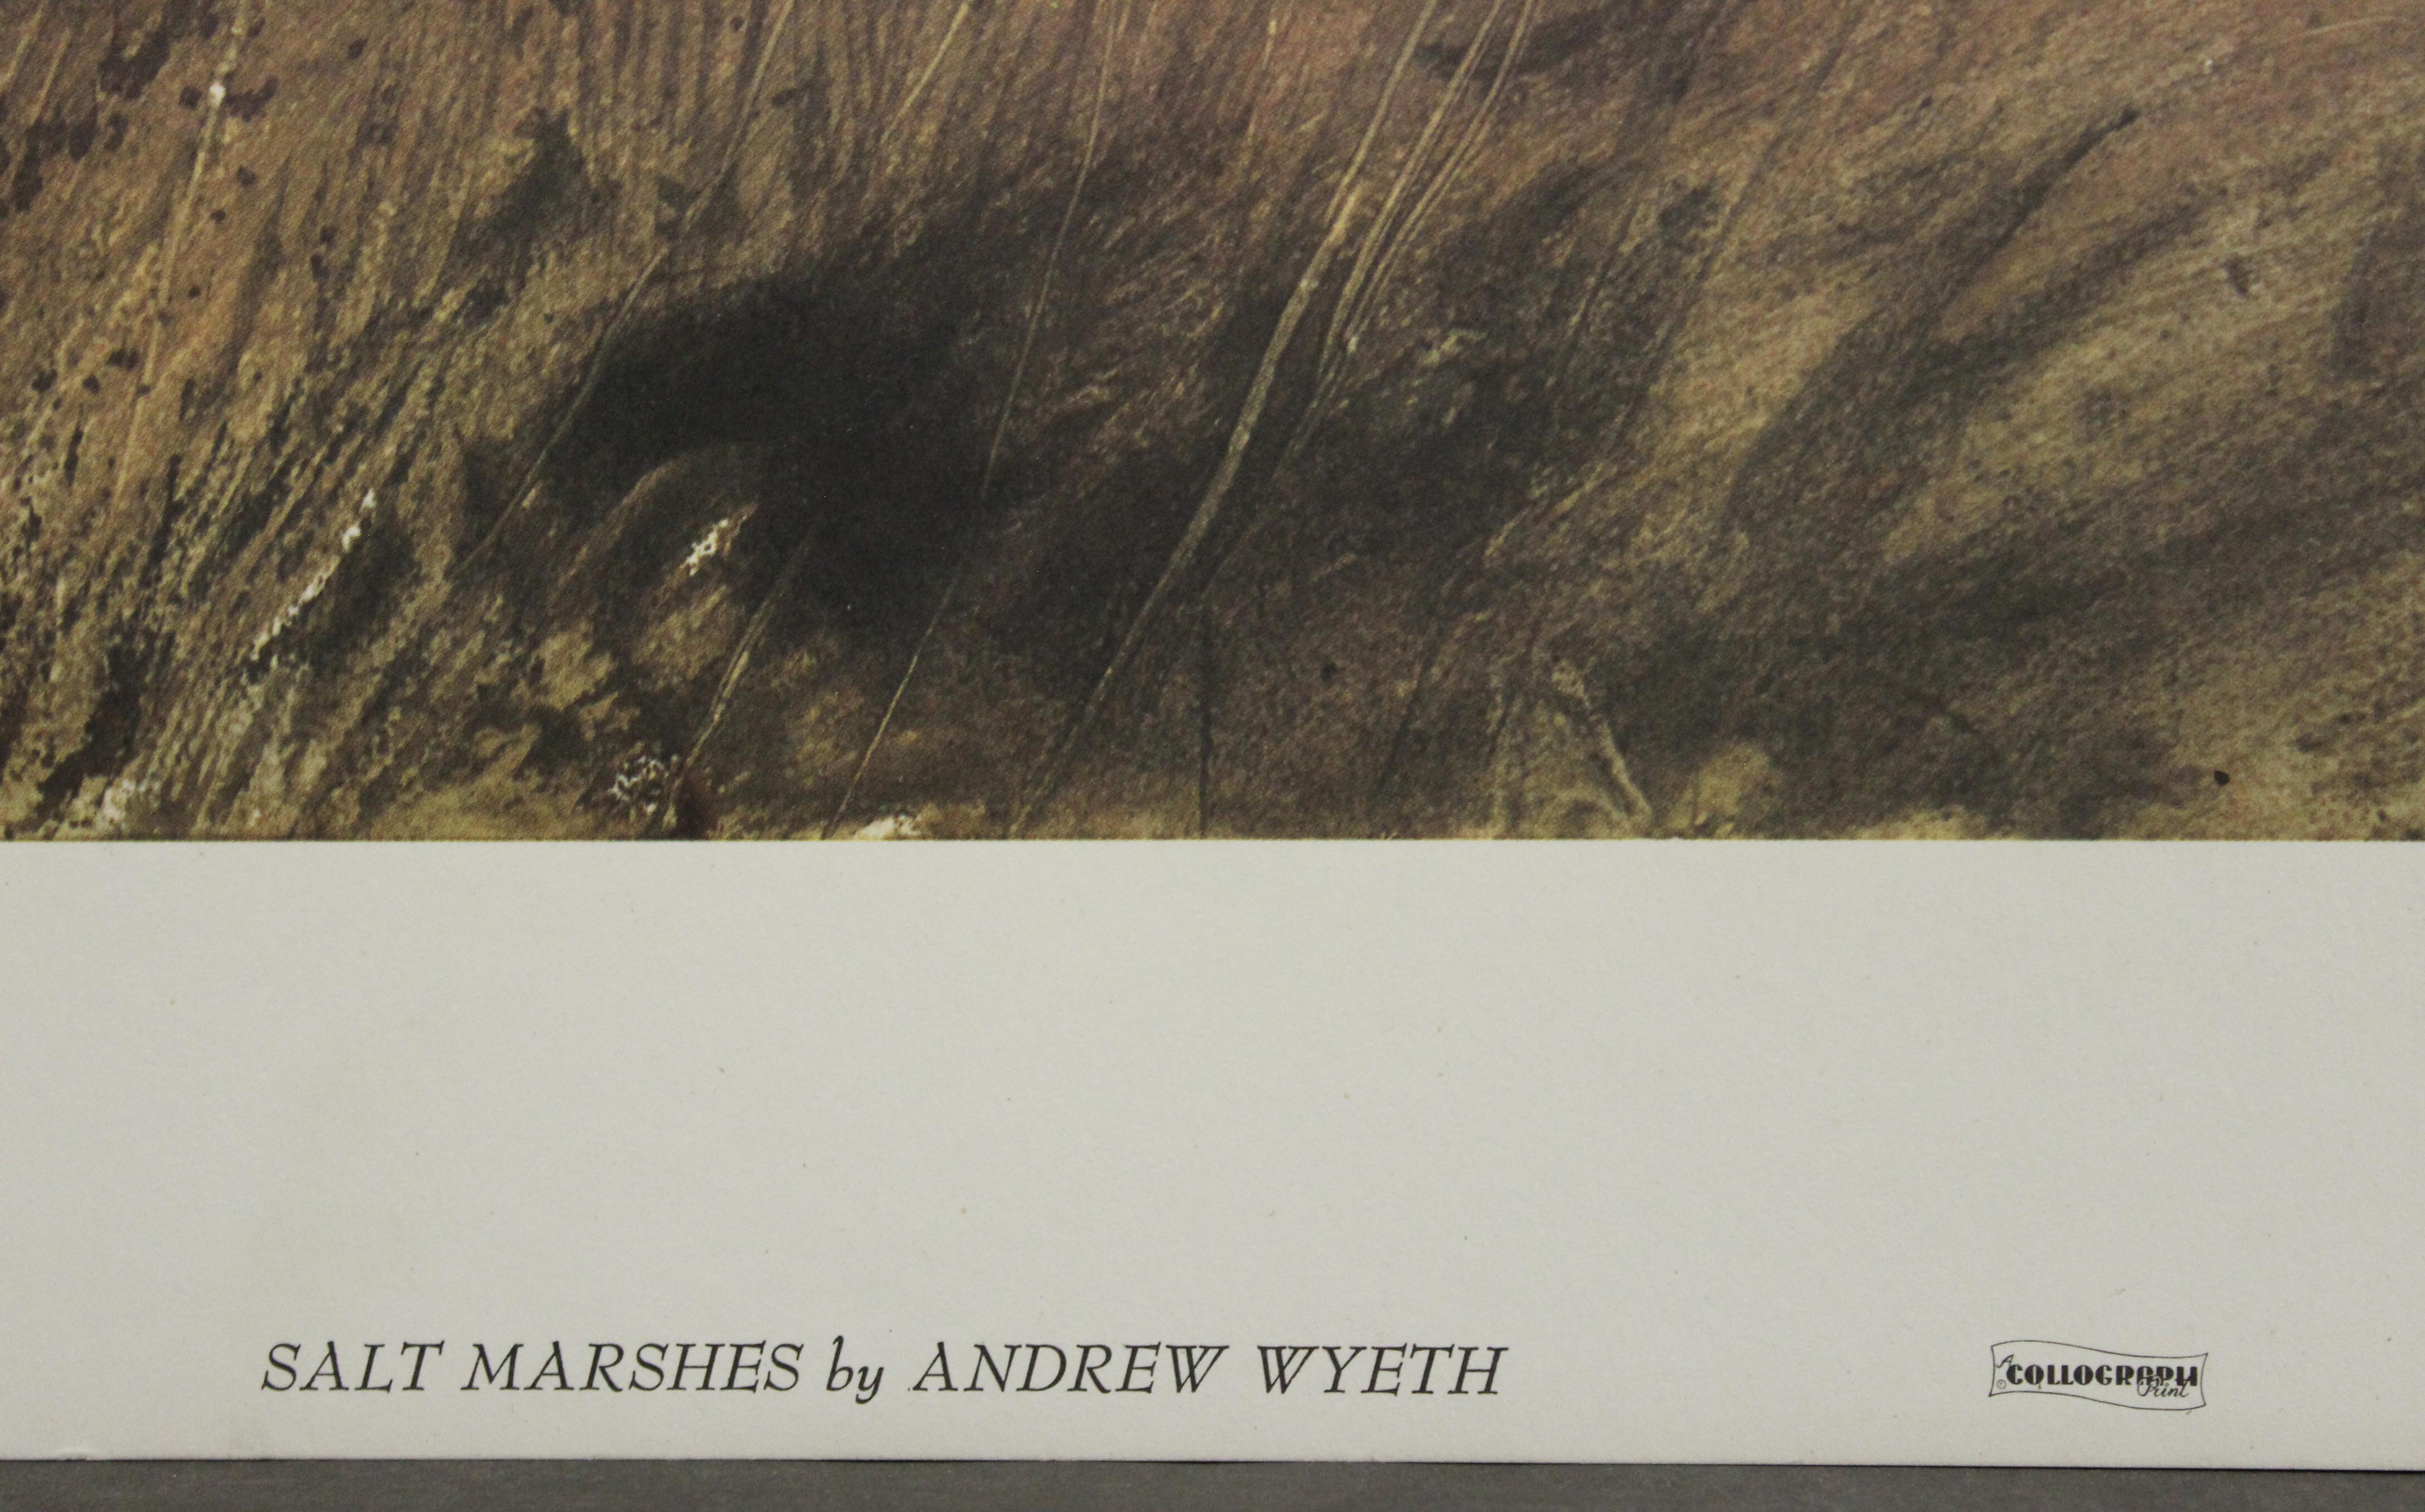 Salt Marshes-Poster. Copyright 1969. Aaron Ashley, Inc.  - Print by (after) Andrew Wyeth